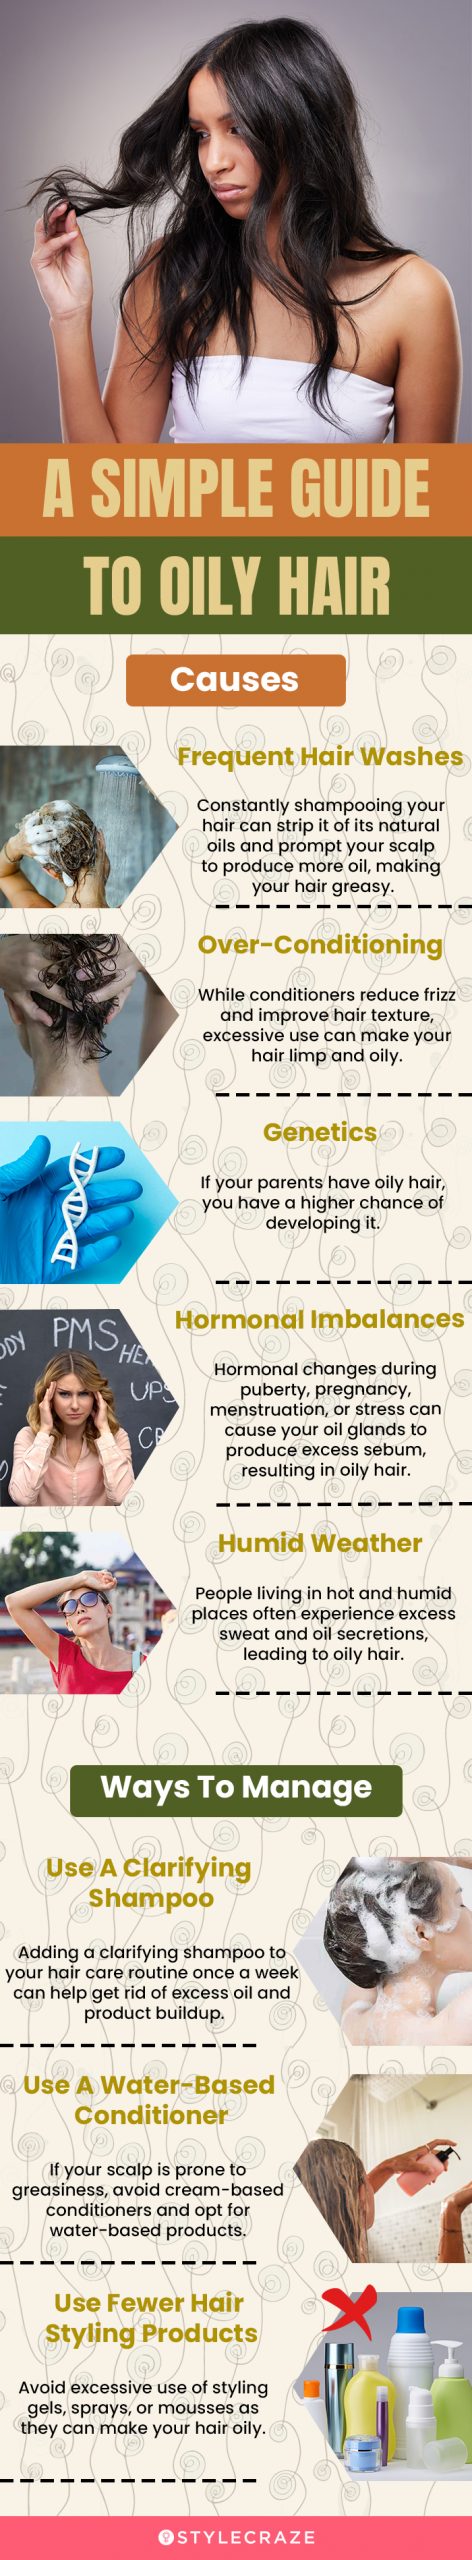 a simple guide to oily hair (infographic)